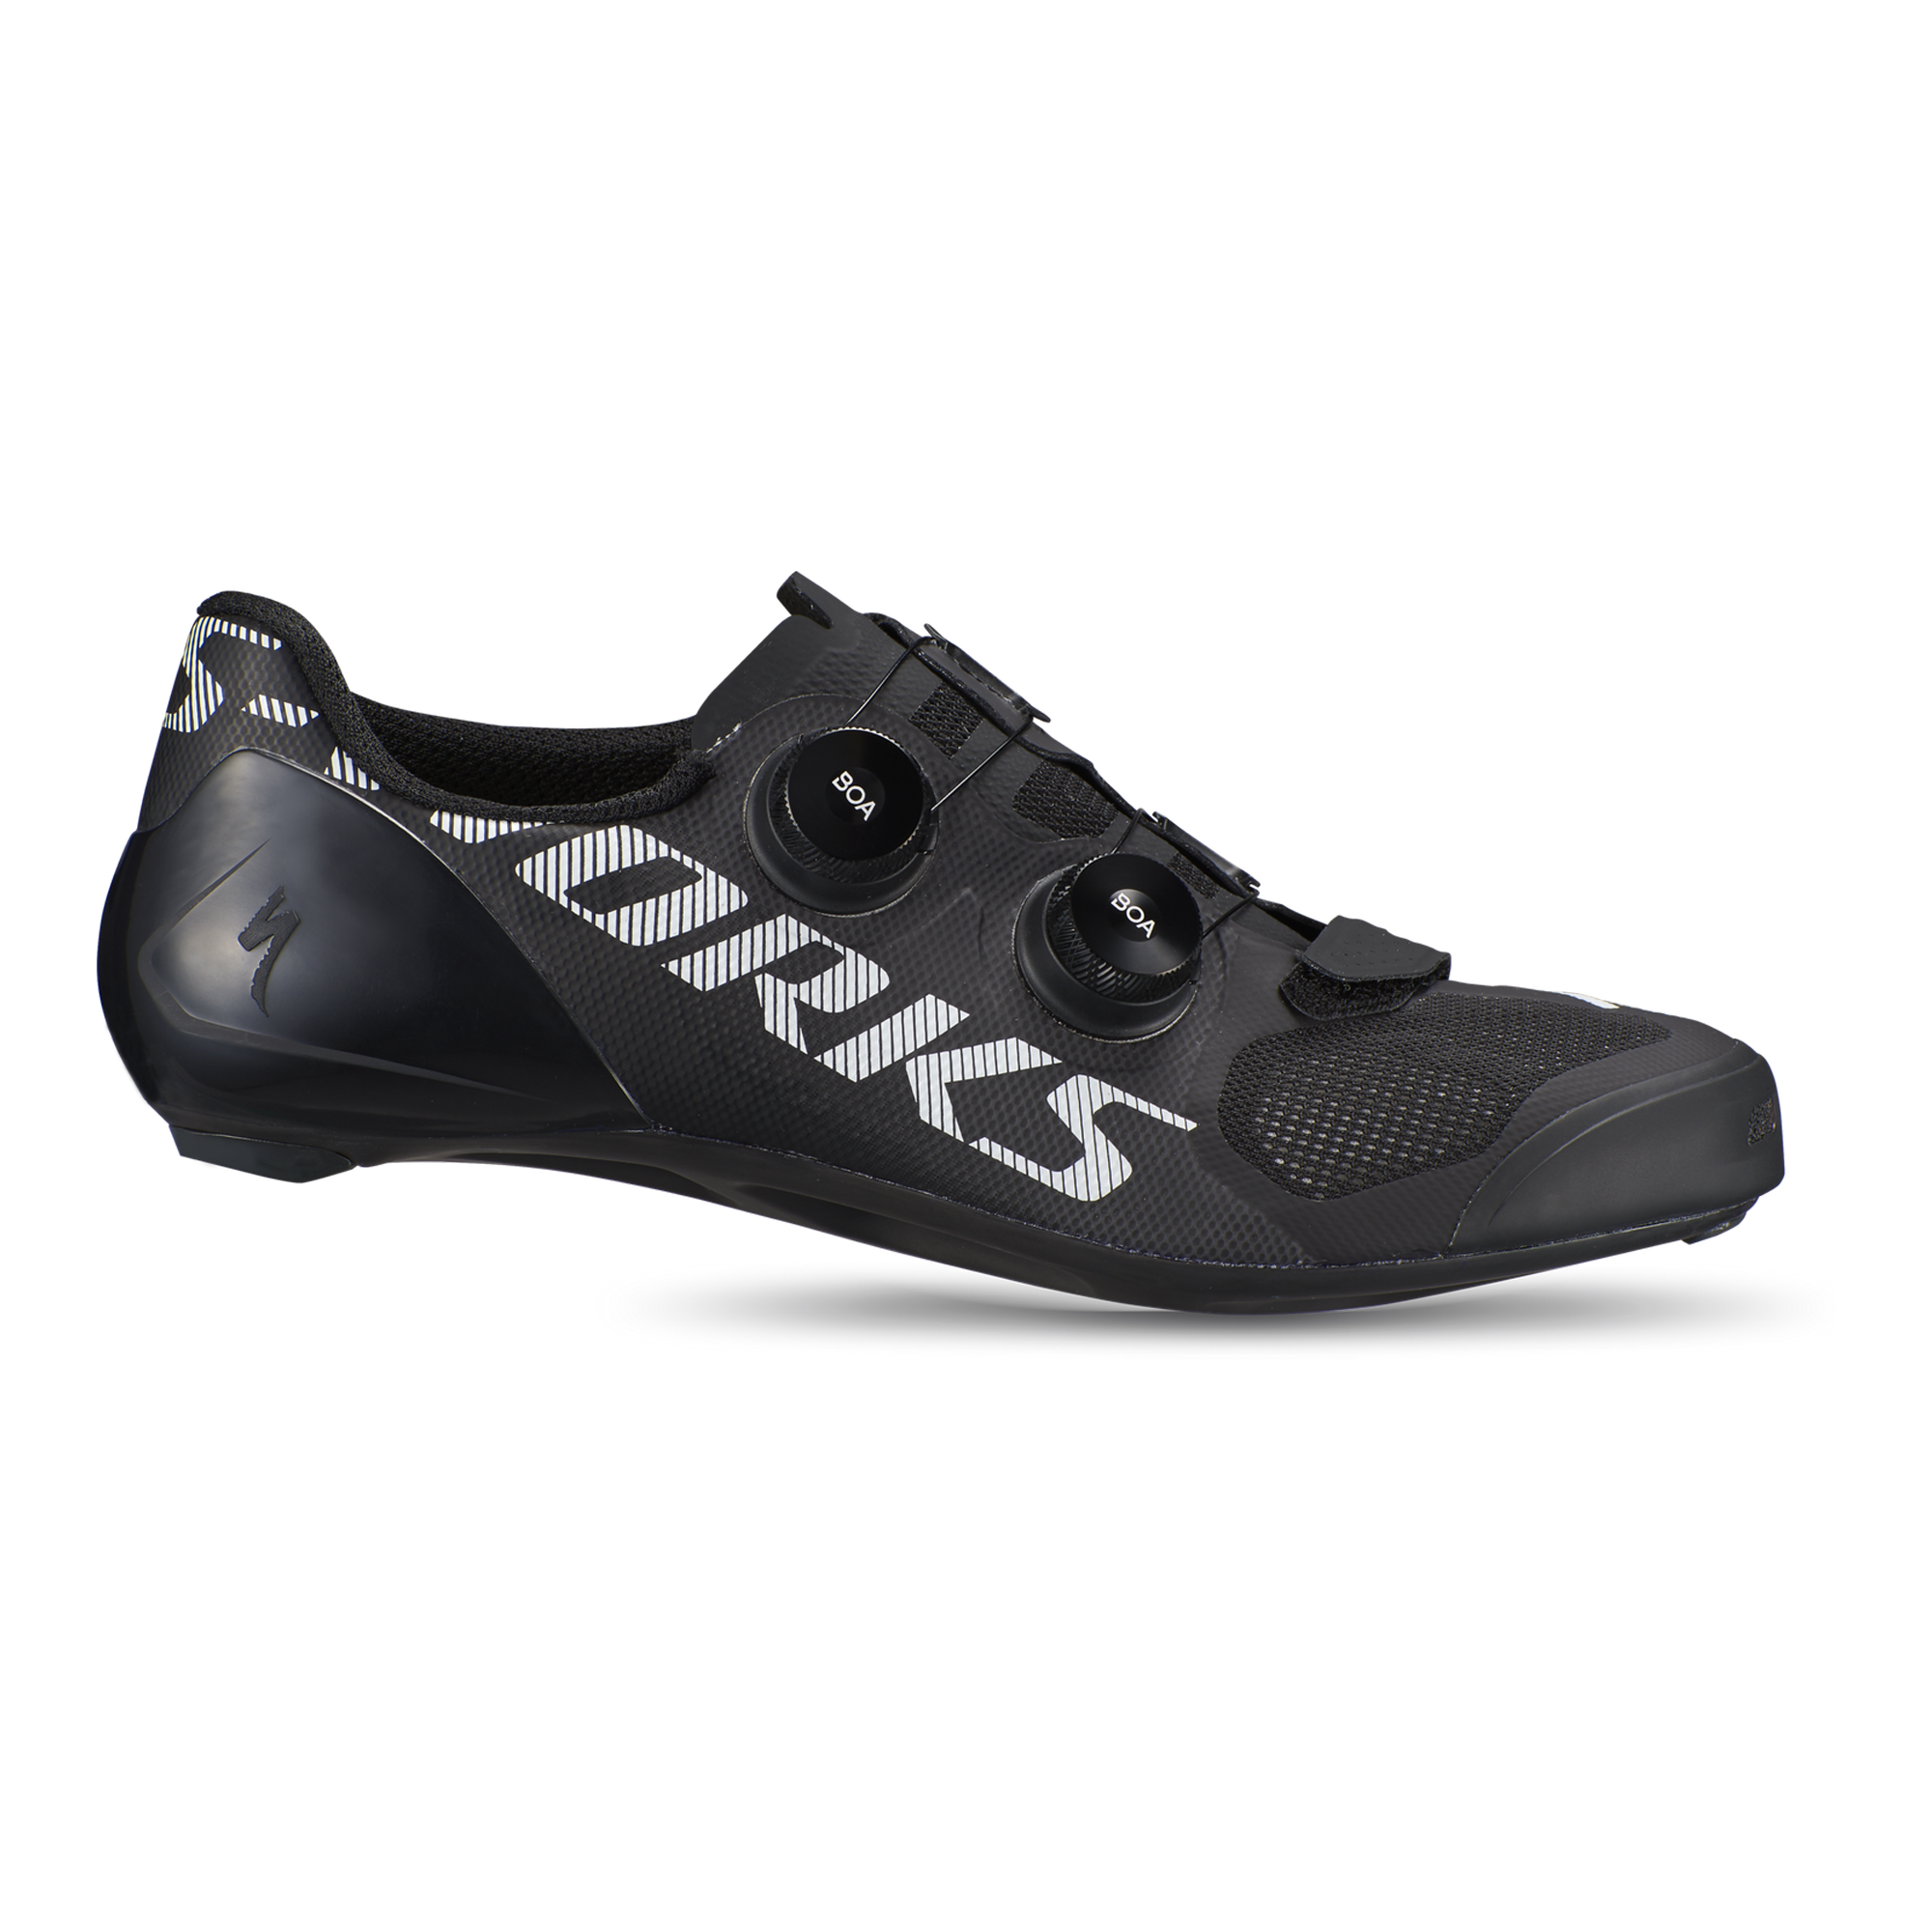 S-Works 7 Vent Road Shoes